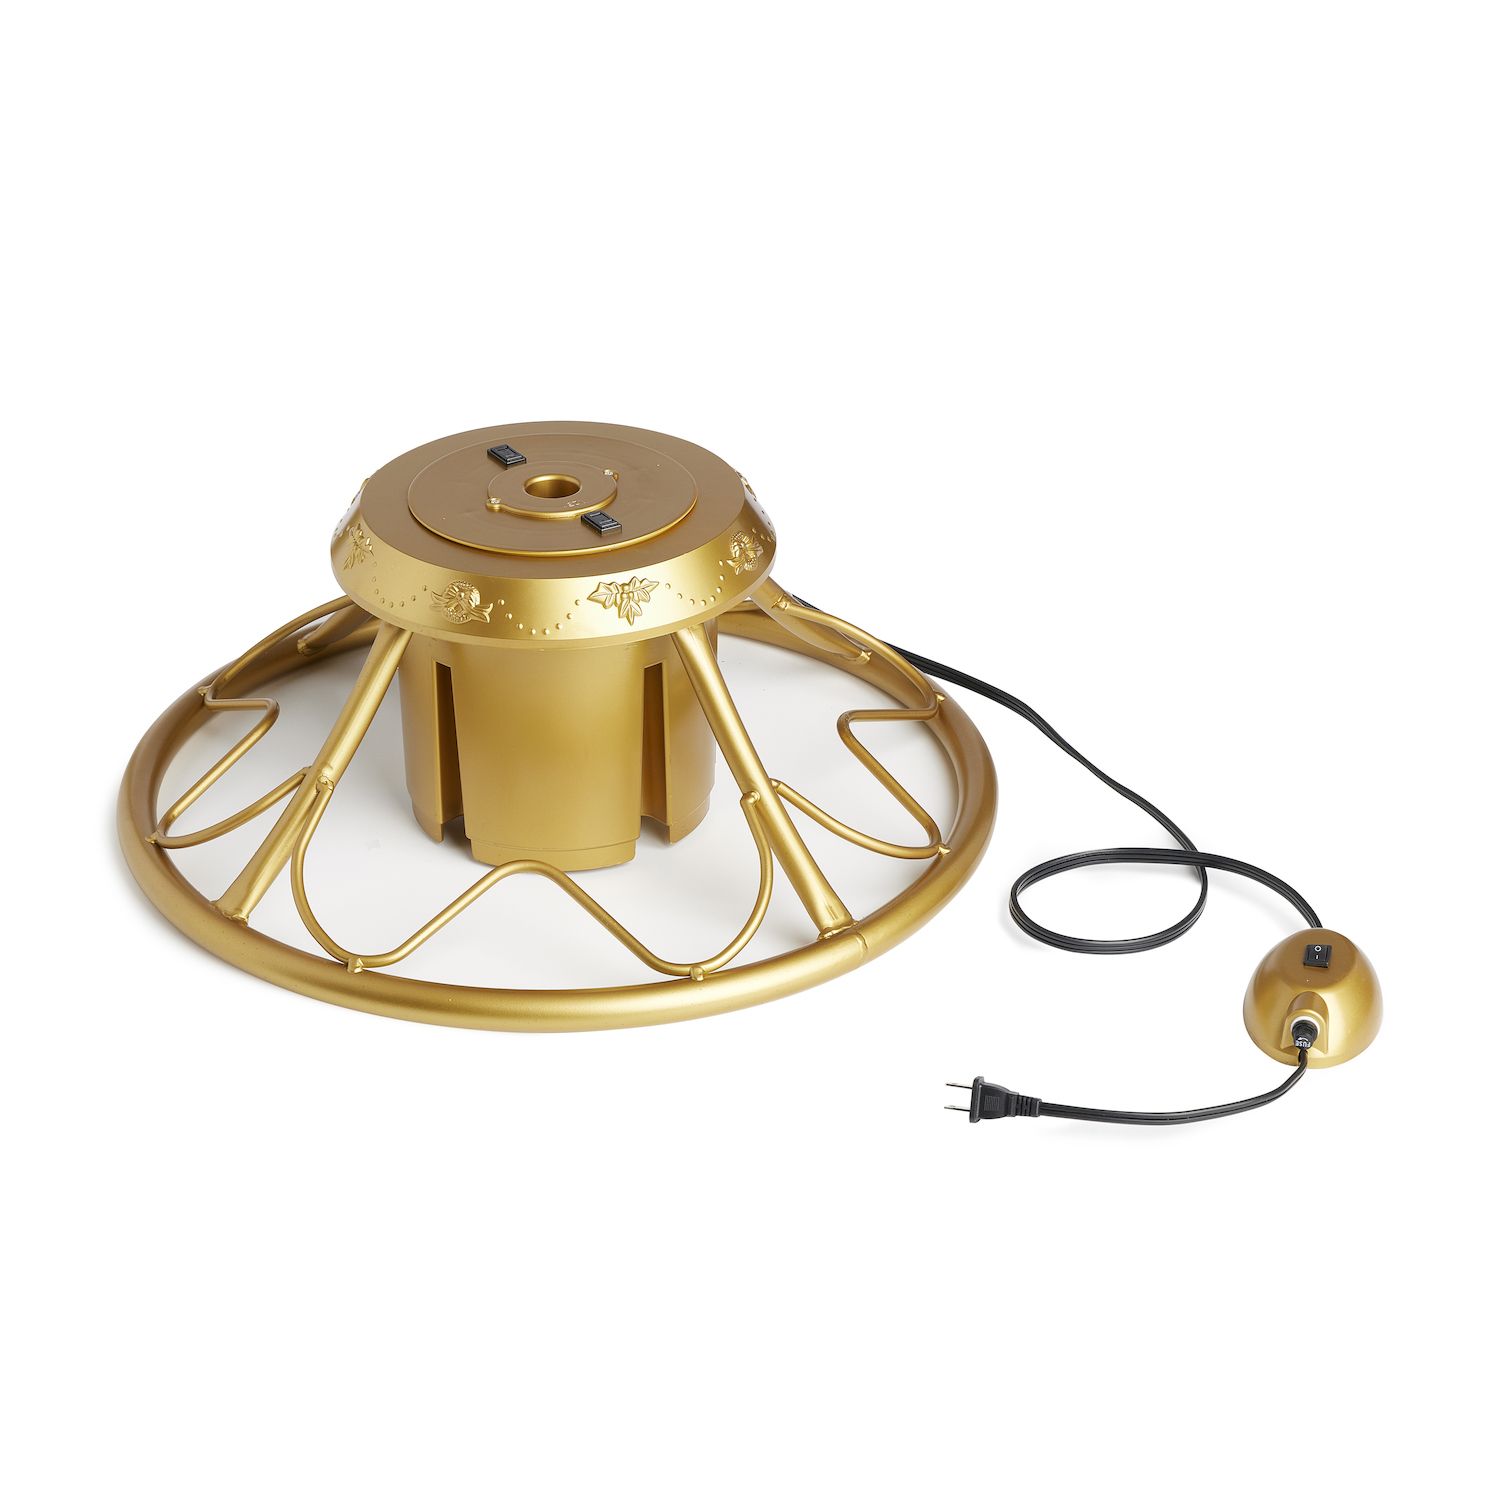 Image for Home Heritage Electric Rotating Metal Stand for Artificial Christmas Trees, Gold at Kohl's.